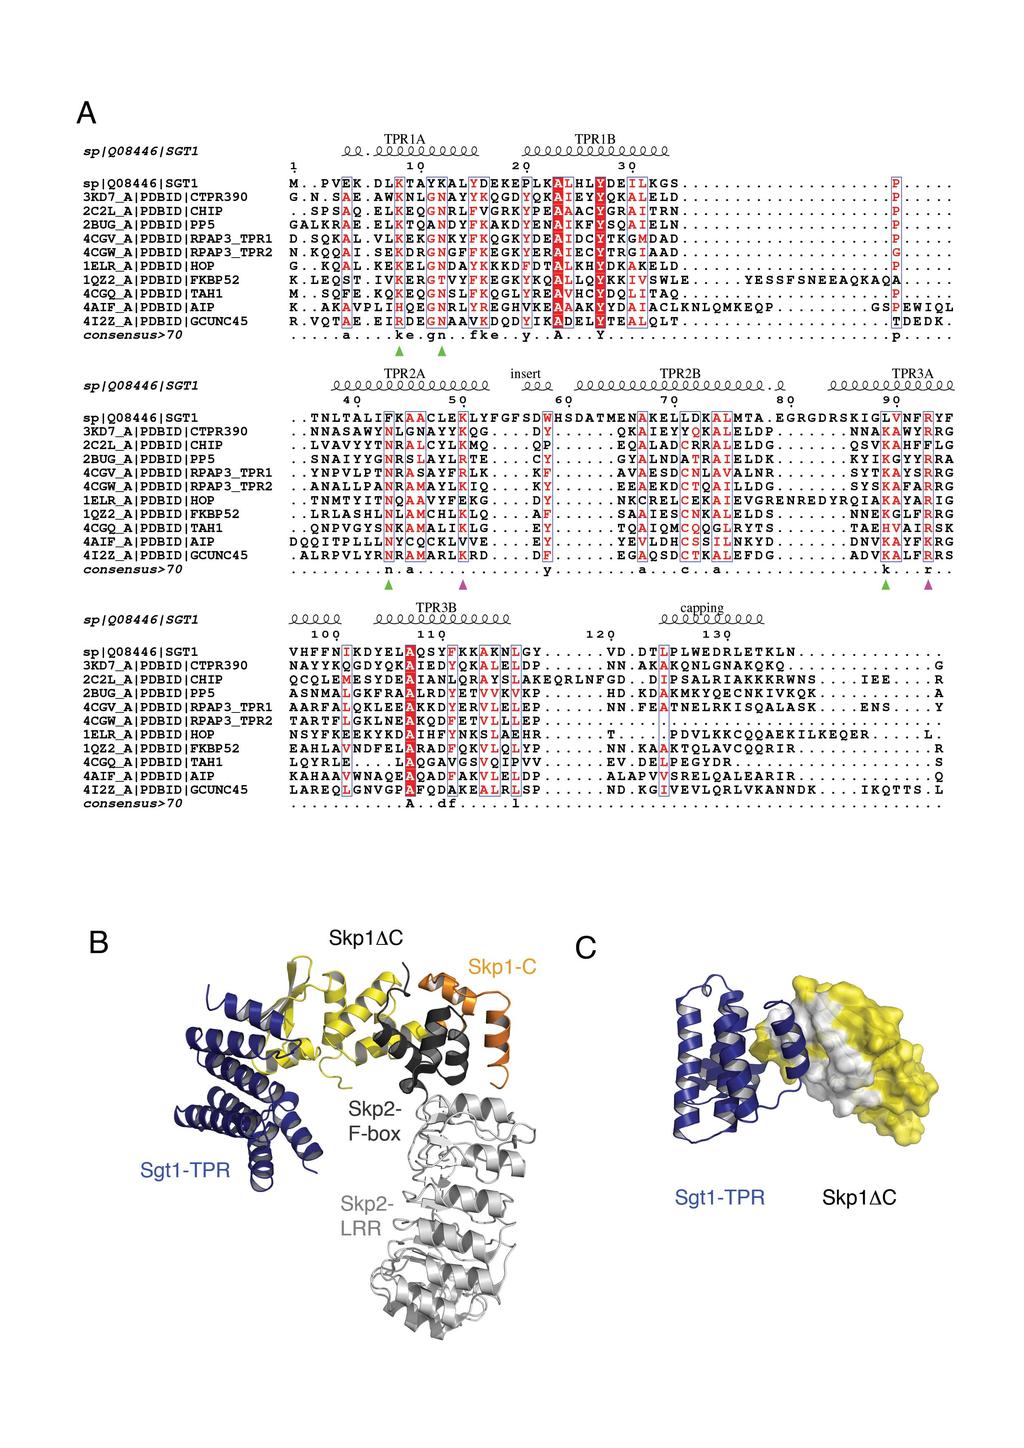 SUPPLEMENTARY FIGURE S4: SGT1-SKP1 IN THE CONTEXT OF TPR-MEEVD, SKP1- FBXL AND SKP1-CULLIN COMPLEXES (A) A structure-based multiple sequence alignment using T-Coffee Expresso of the TPR domain of